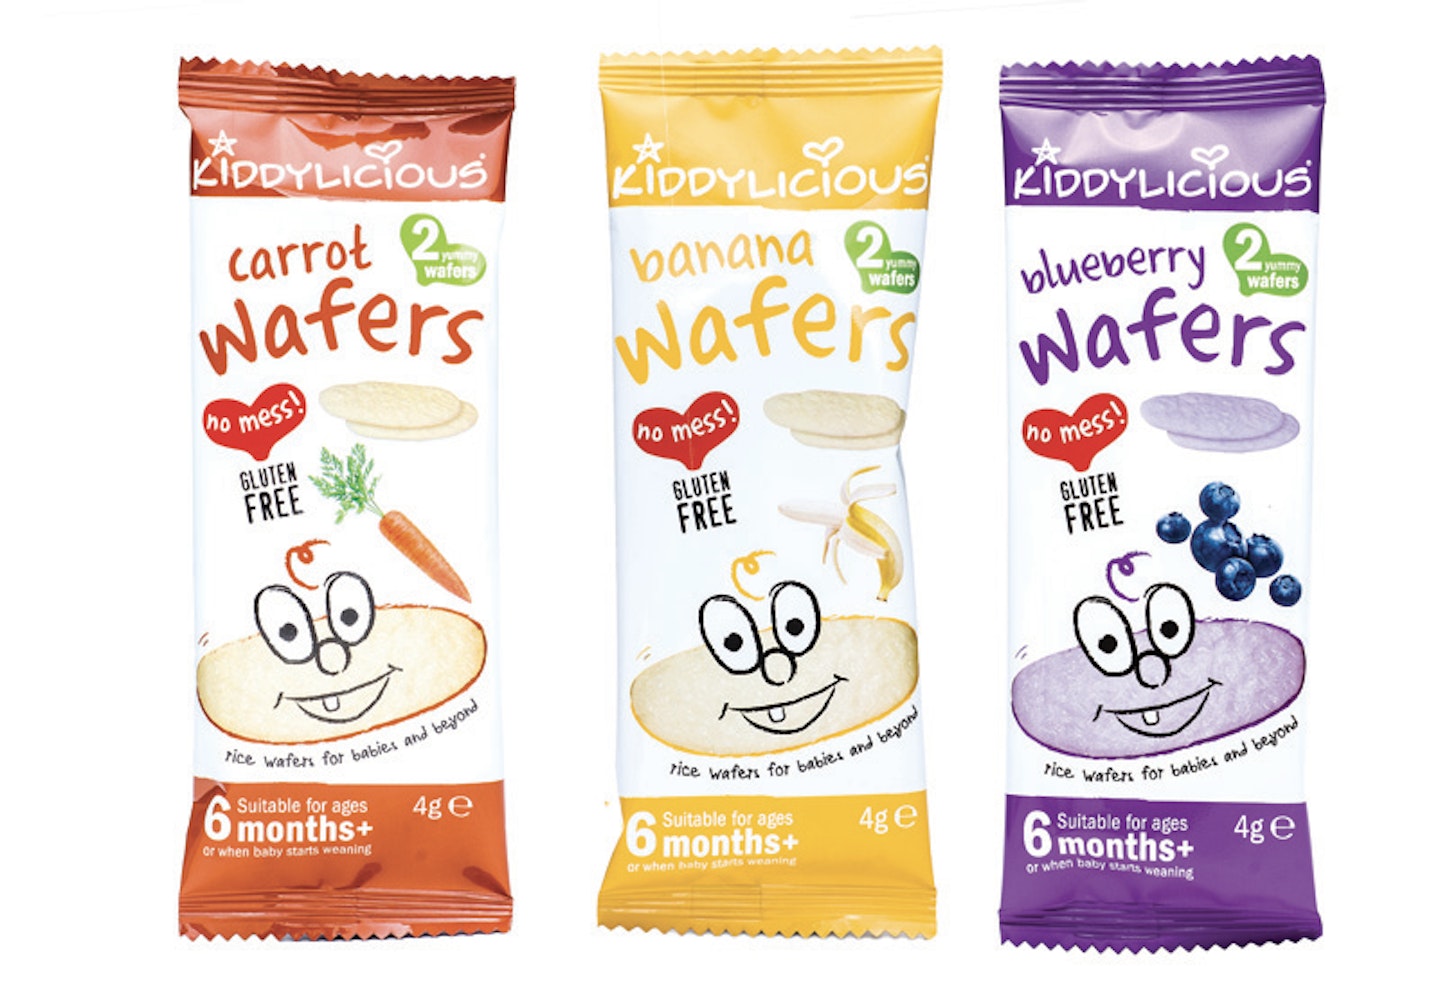 Kiddylicious Wafers review